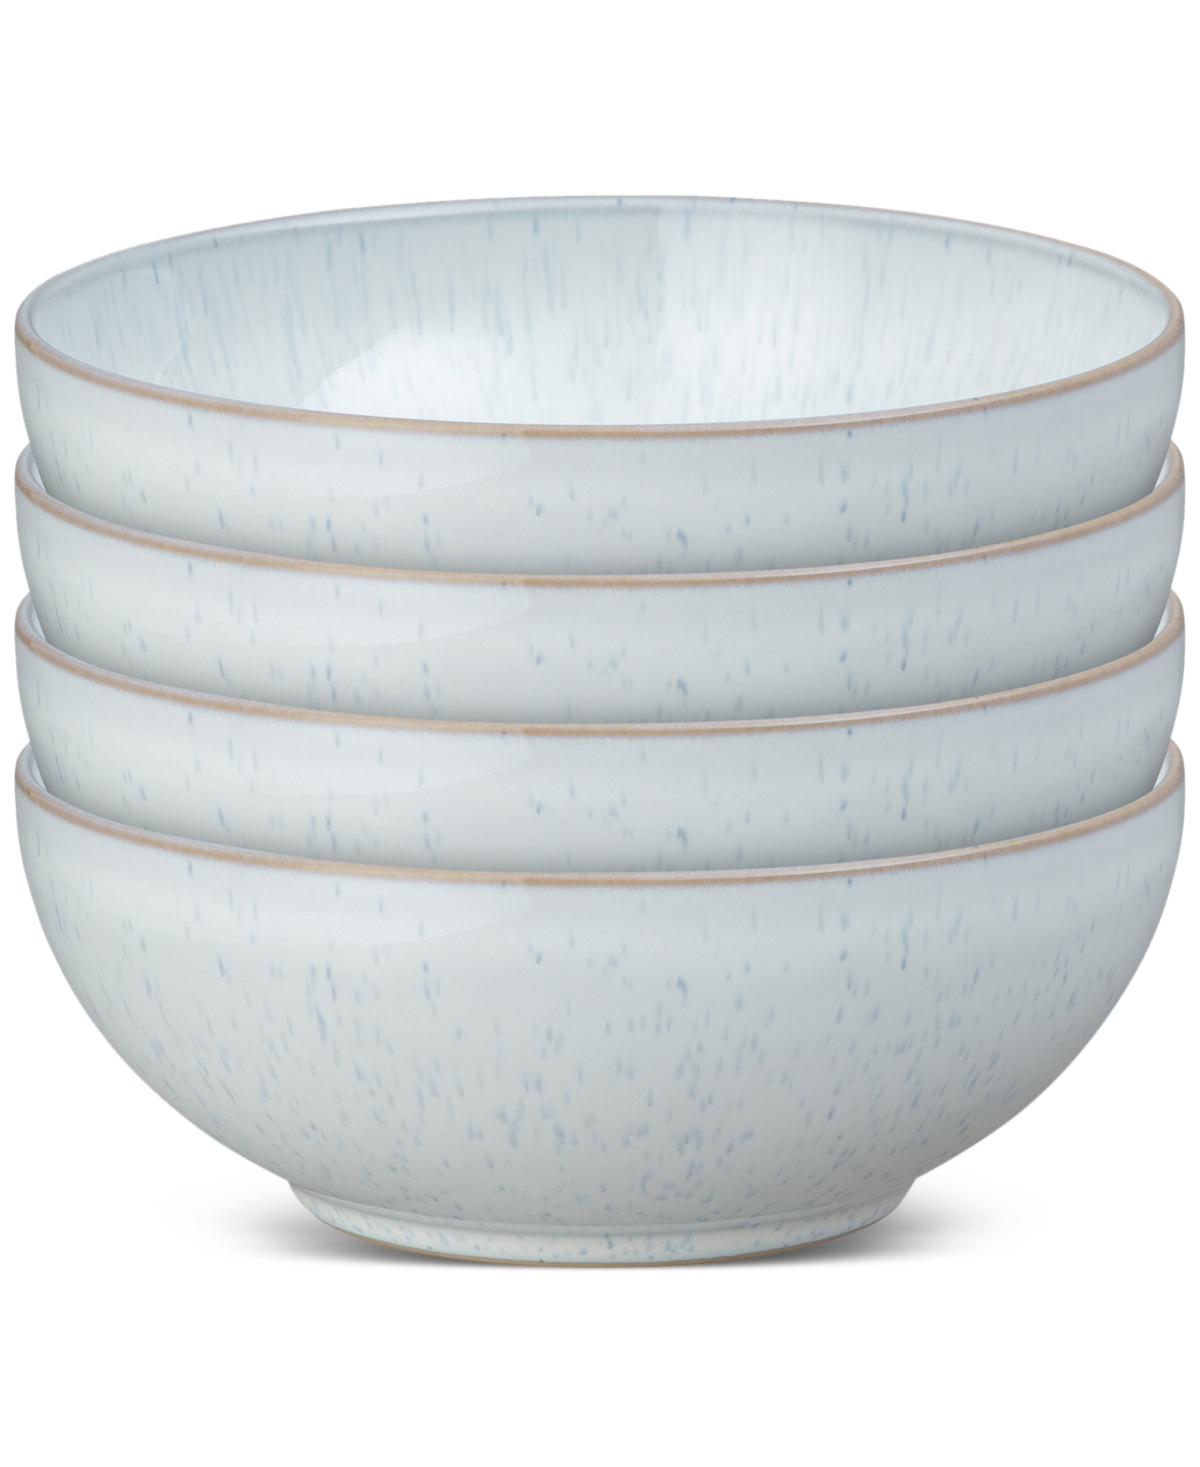 White Speckle Stoneware Coupe Cereal Bowls, Set of 4 - White